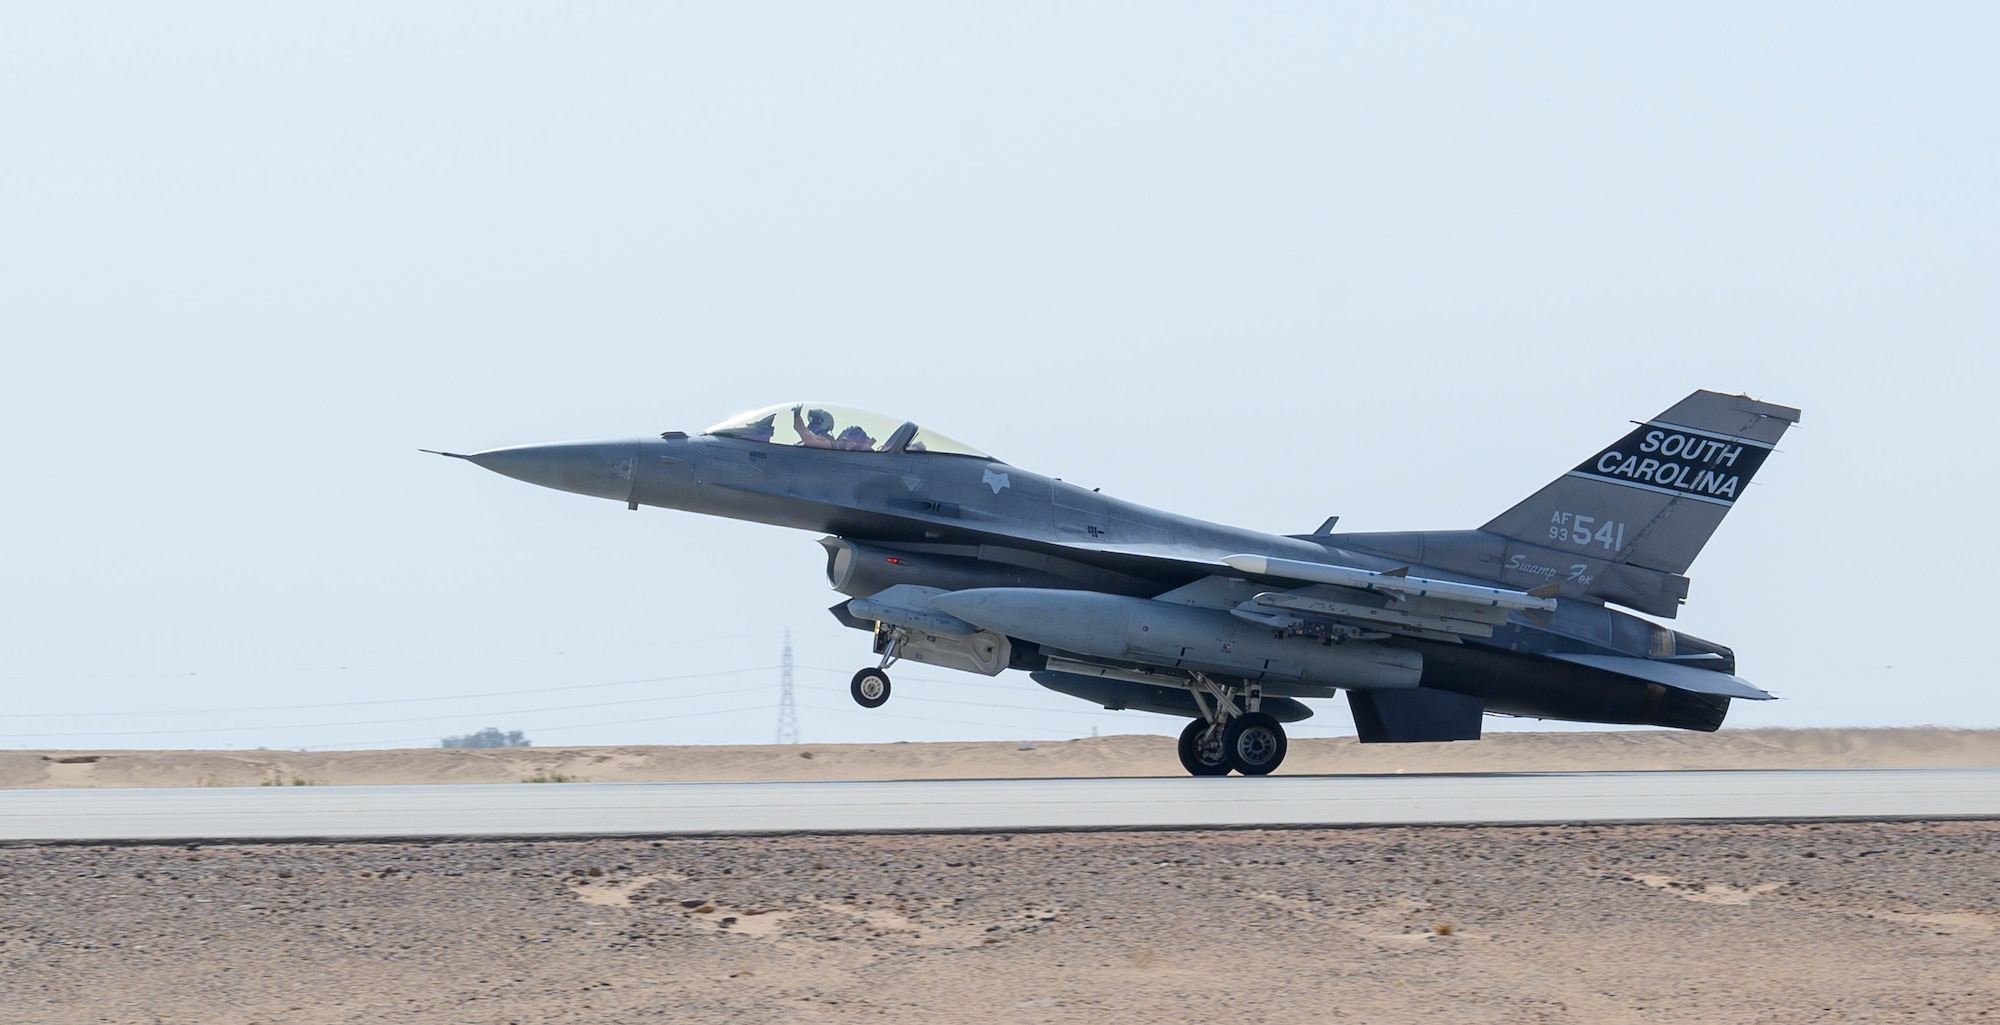 A U.S. Air Force F-16CJ Fighting Falcon from South Carolina Air National Guard’s 169th “Swamp Fox” Fighter Wing lands on the flight line at Prince Sultan Air Base, Kingdom of Saudi Arabia, April 14, 2021. The Swamp Fox team has been deployed to PSAB to help bolster the defensive capabilities against potential threats in the region. (U.S. Air Force Photo by Senior Airman Samuel Earick)